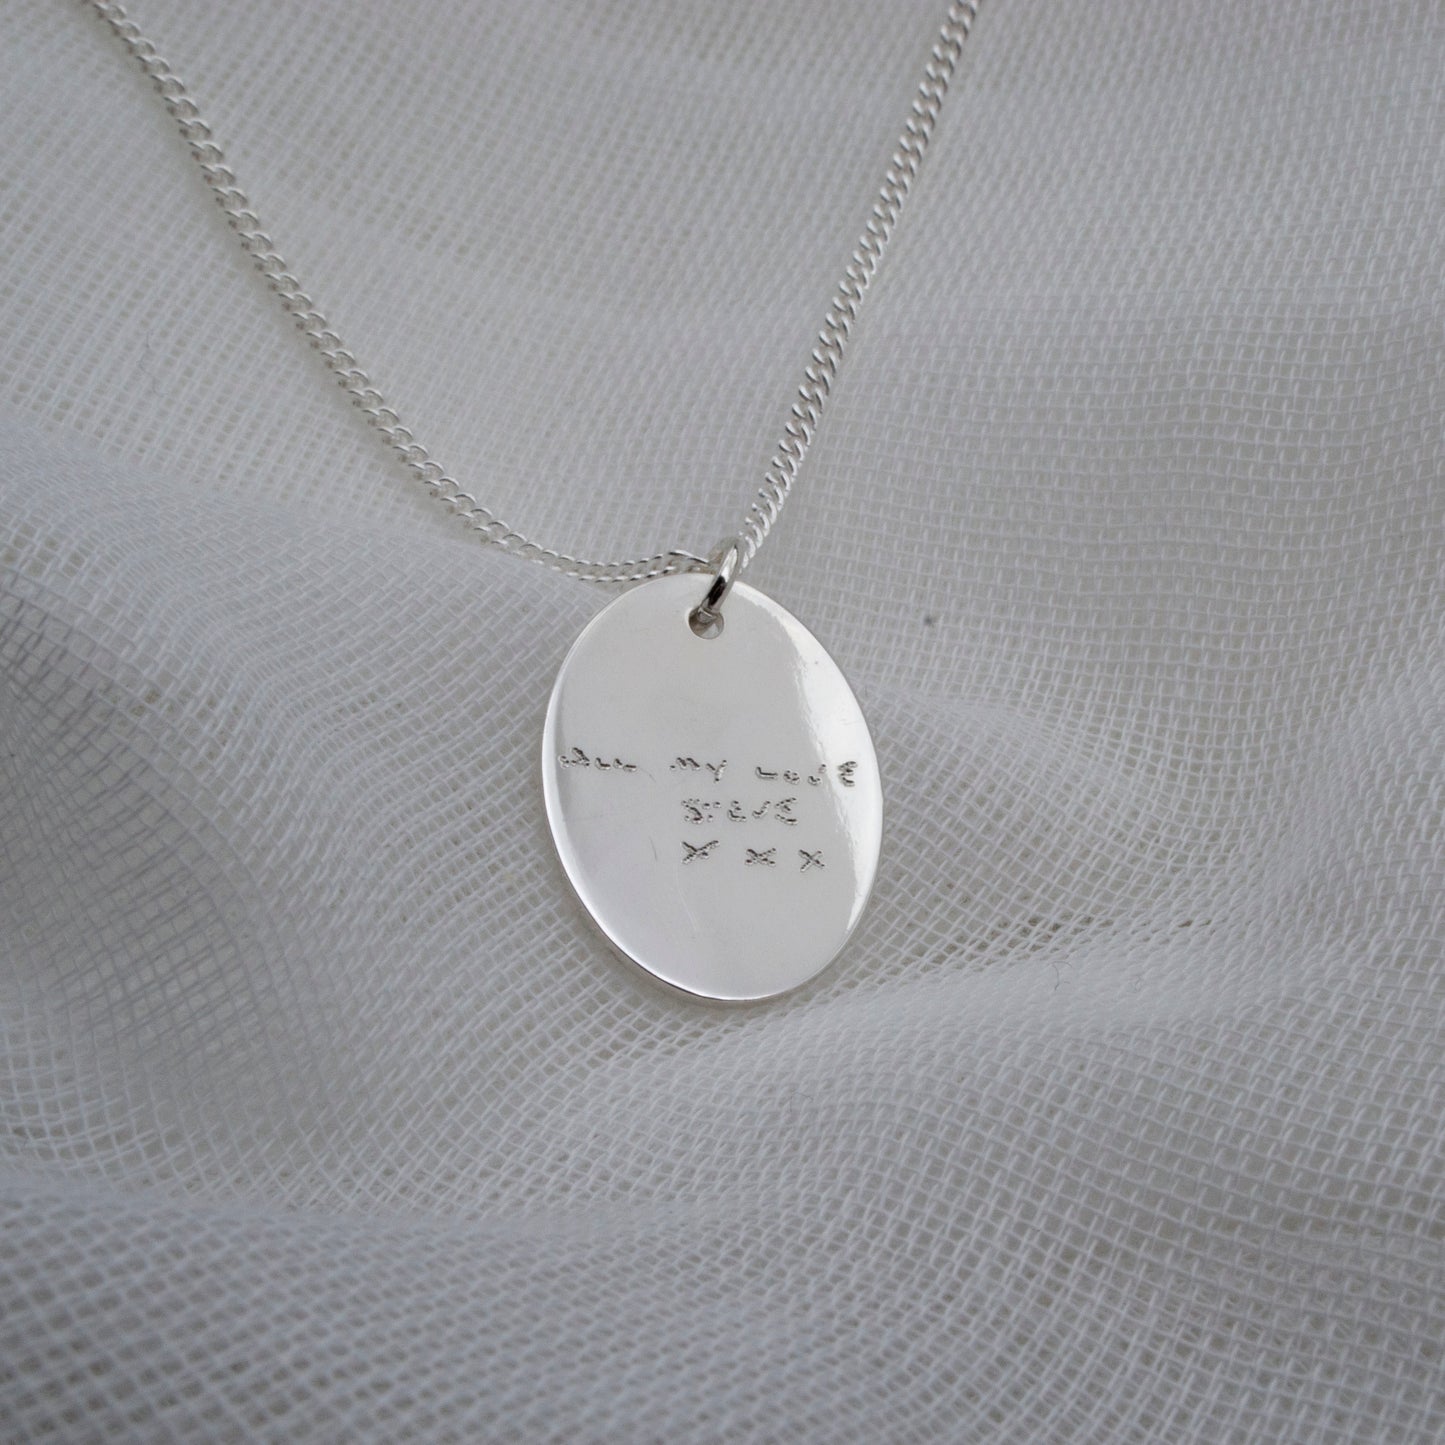 Handwriting pendant necklace in sterling silver - round